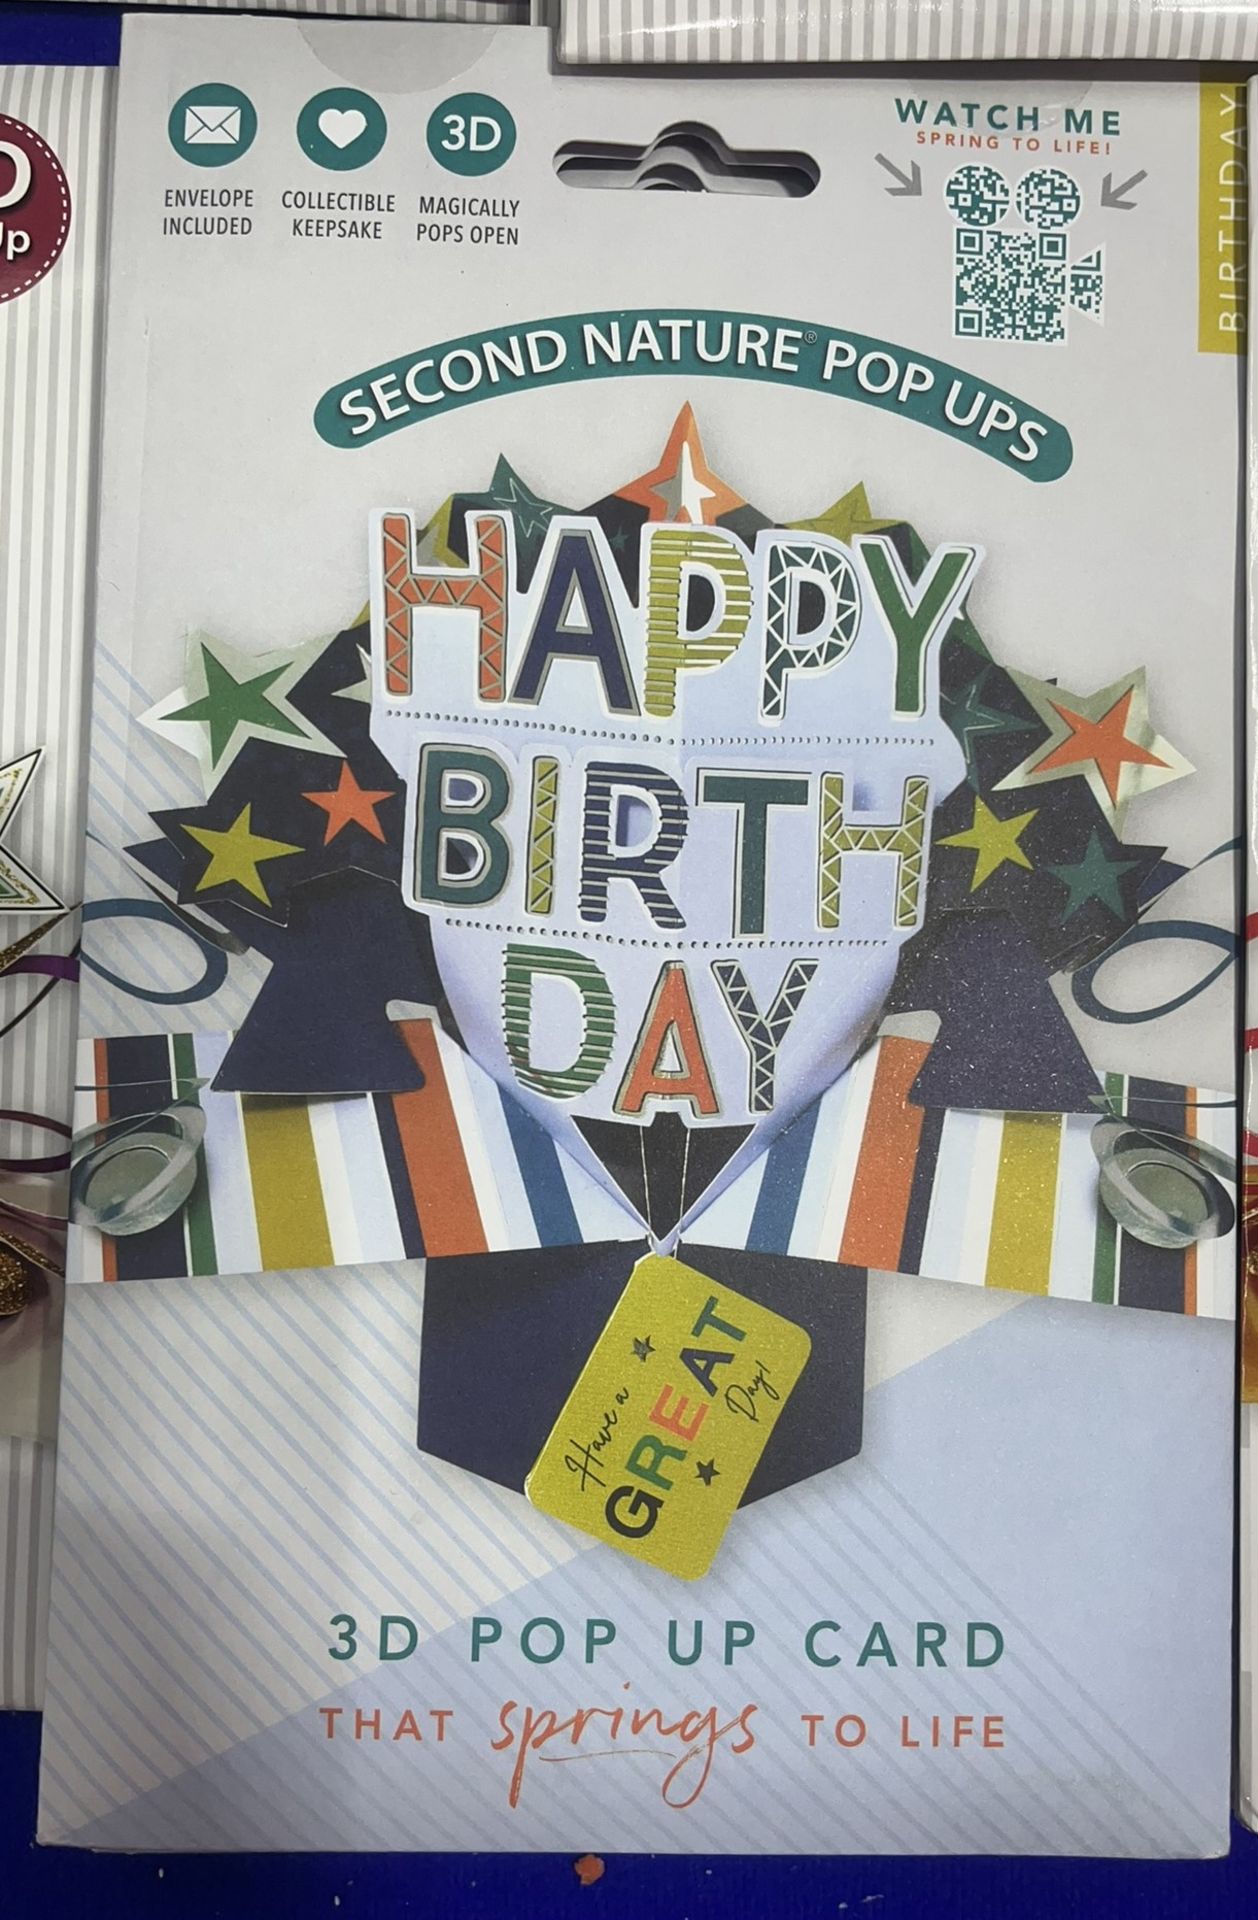 50 x Second Nature Pop Ups 3D Pop Up Cards - Image 13 of 14